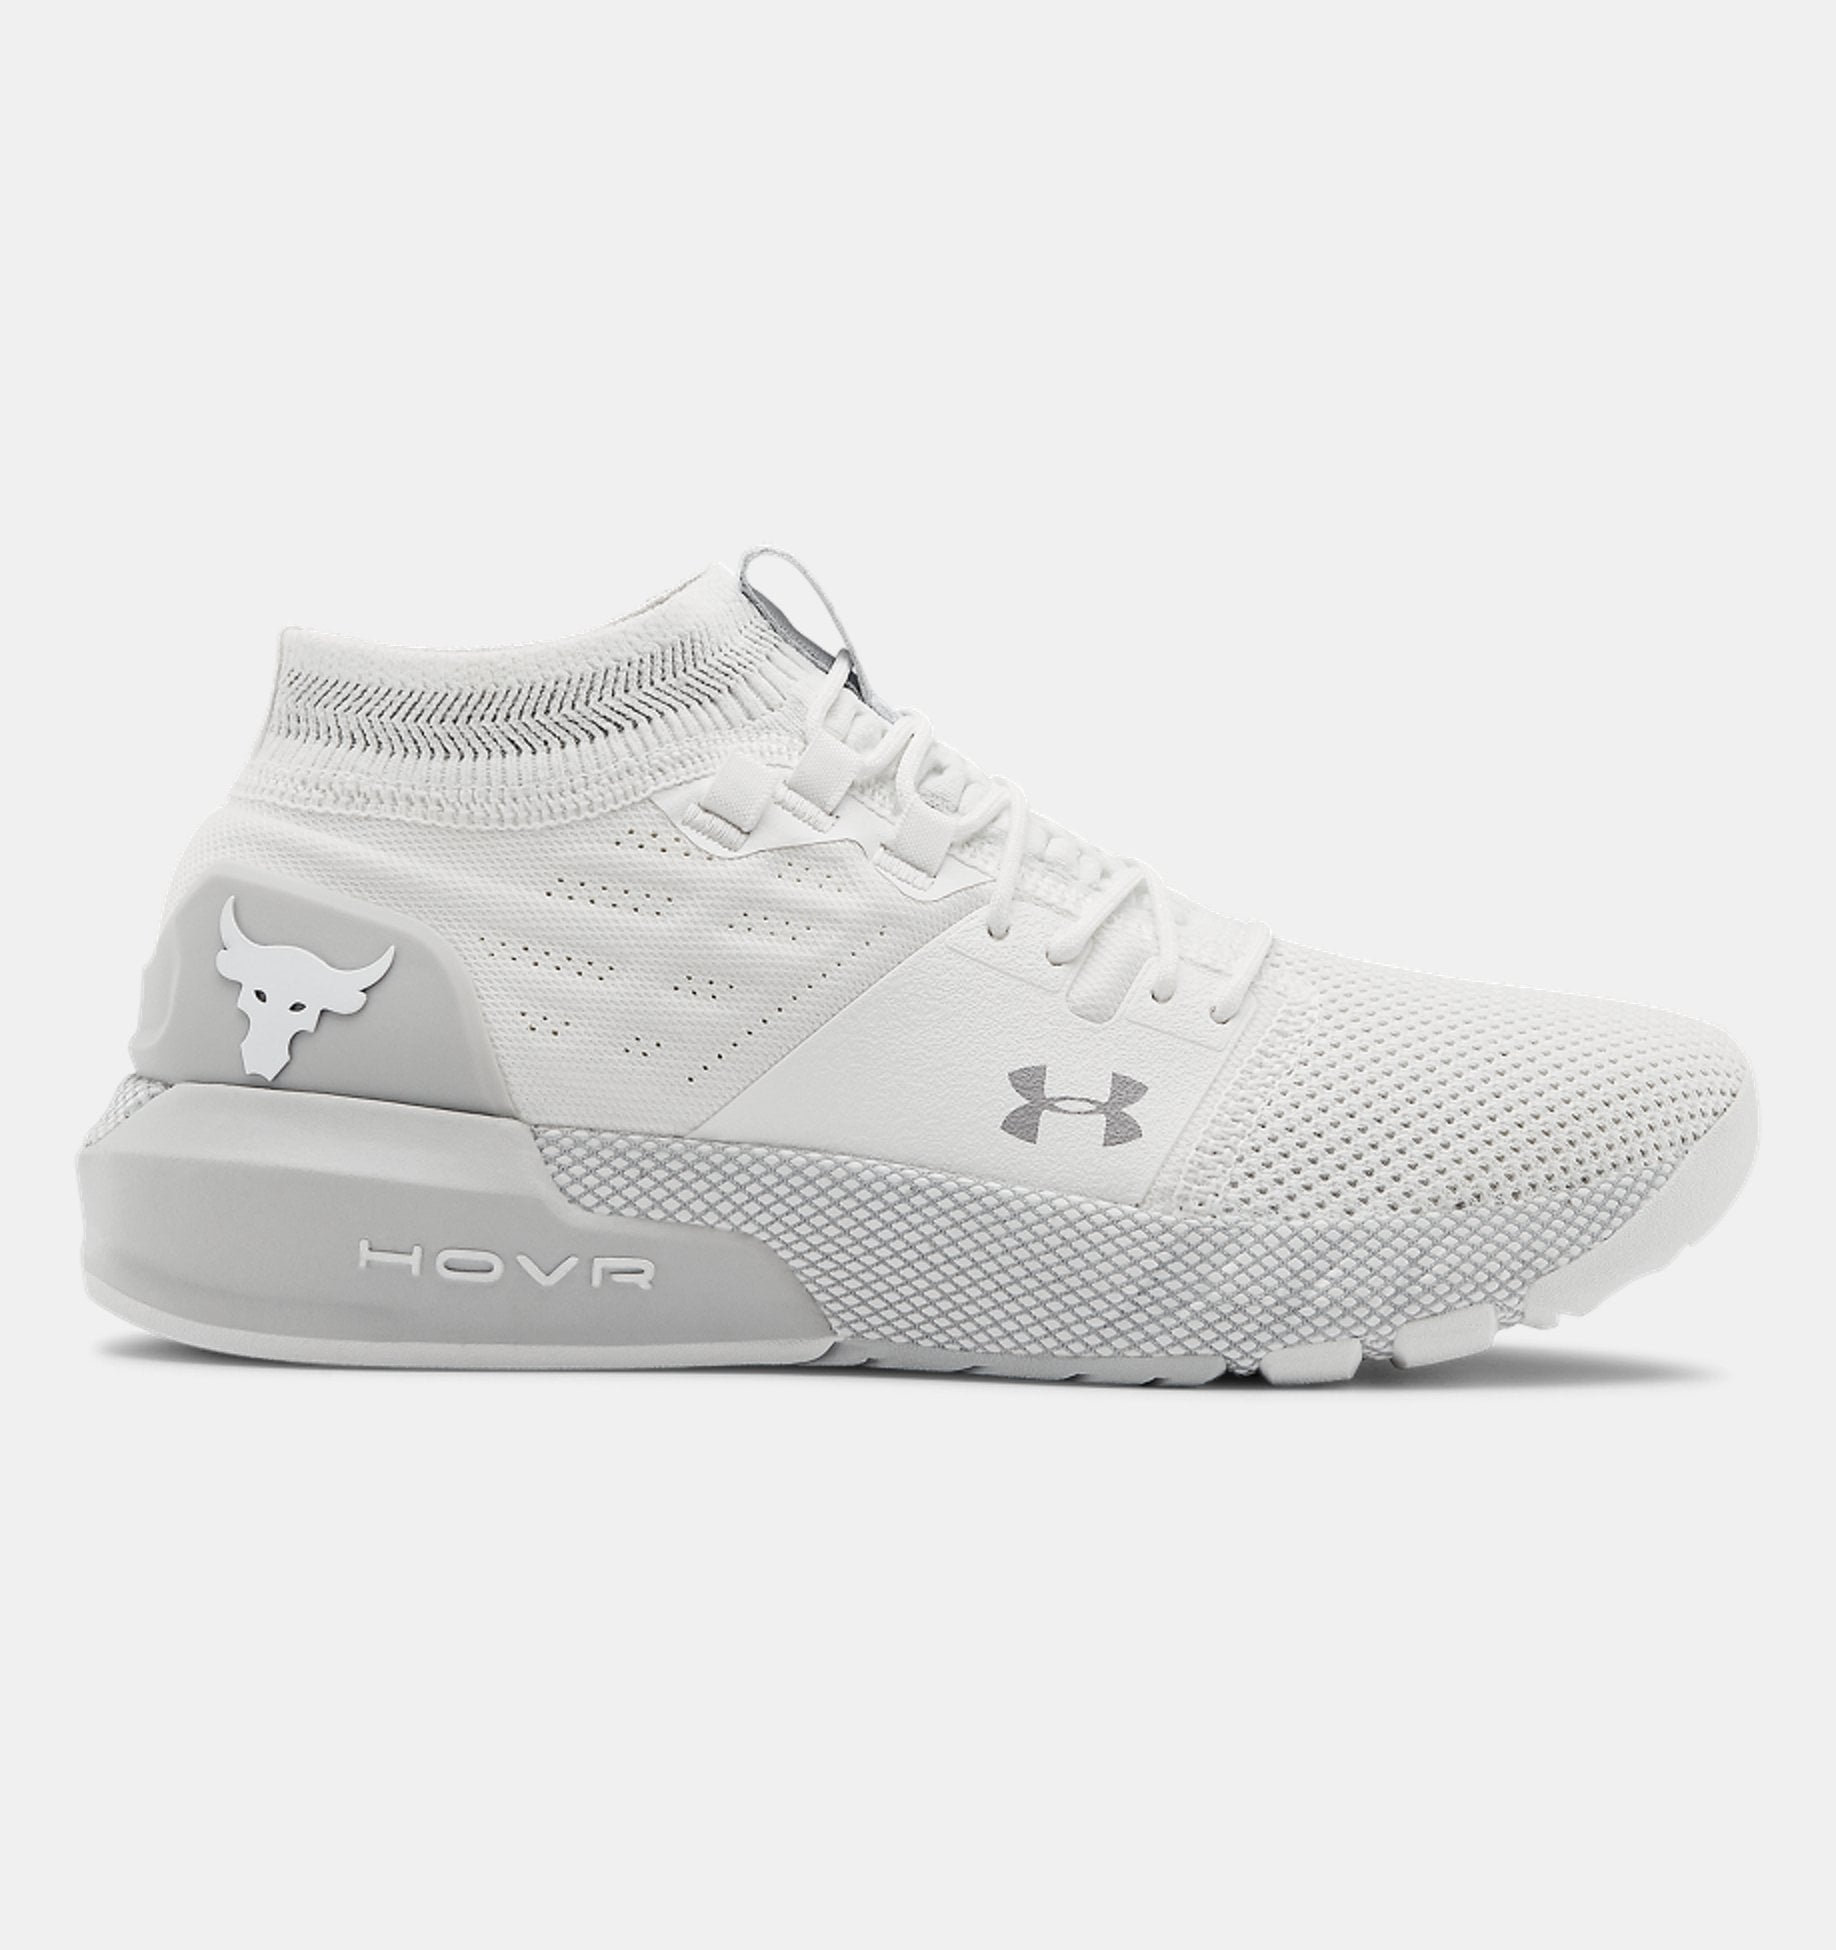 Grave golondrina calcio Shop These Under Armour Sneakers For Weightlifting | POPSUGAR Fitness